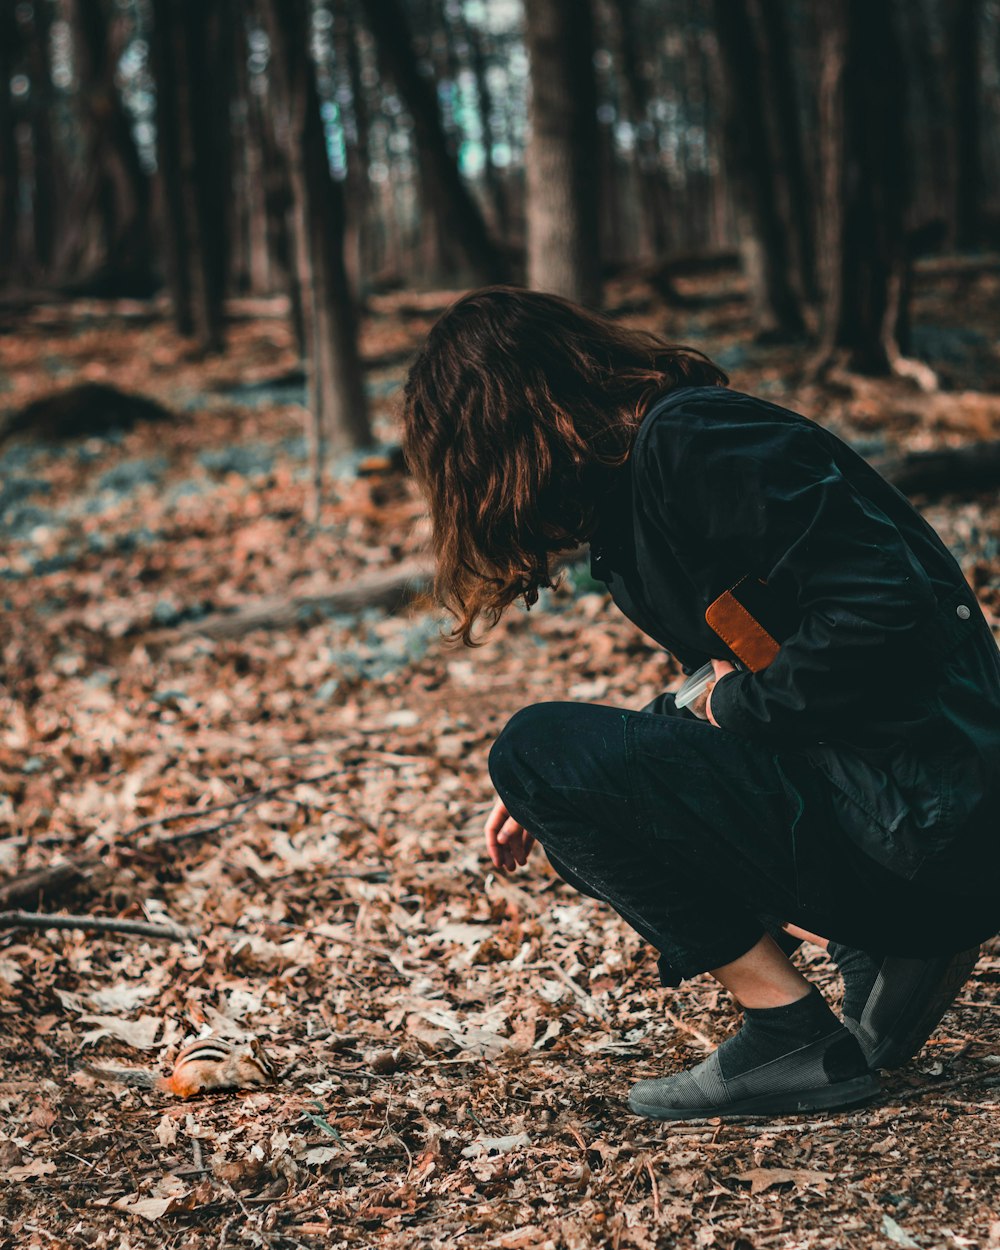 woman in black jacket and pants sitting on ground with dried leaves